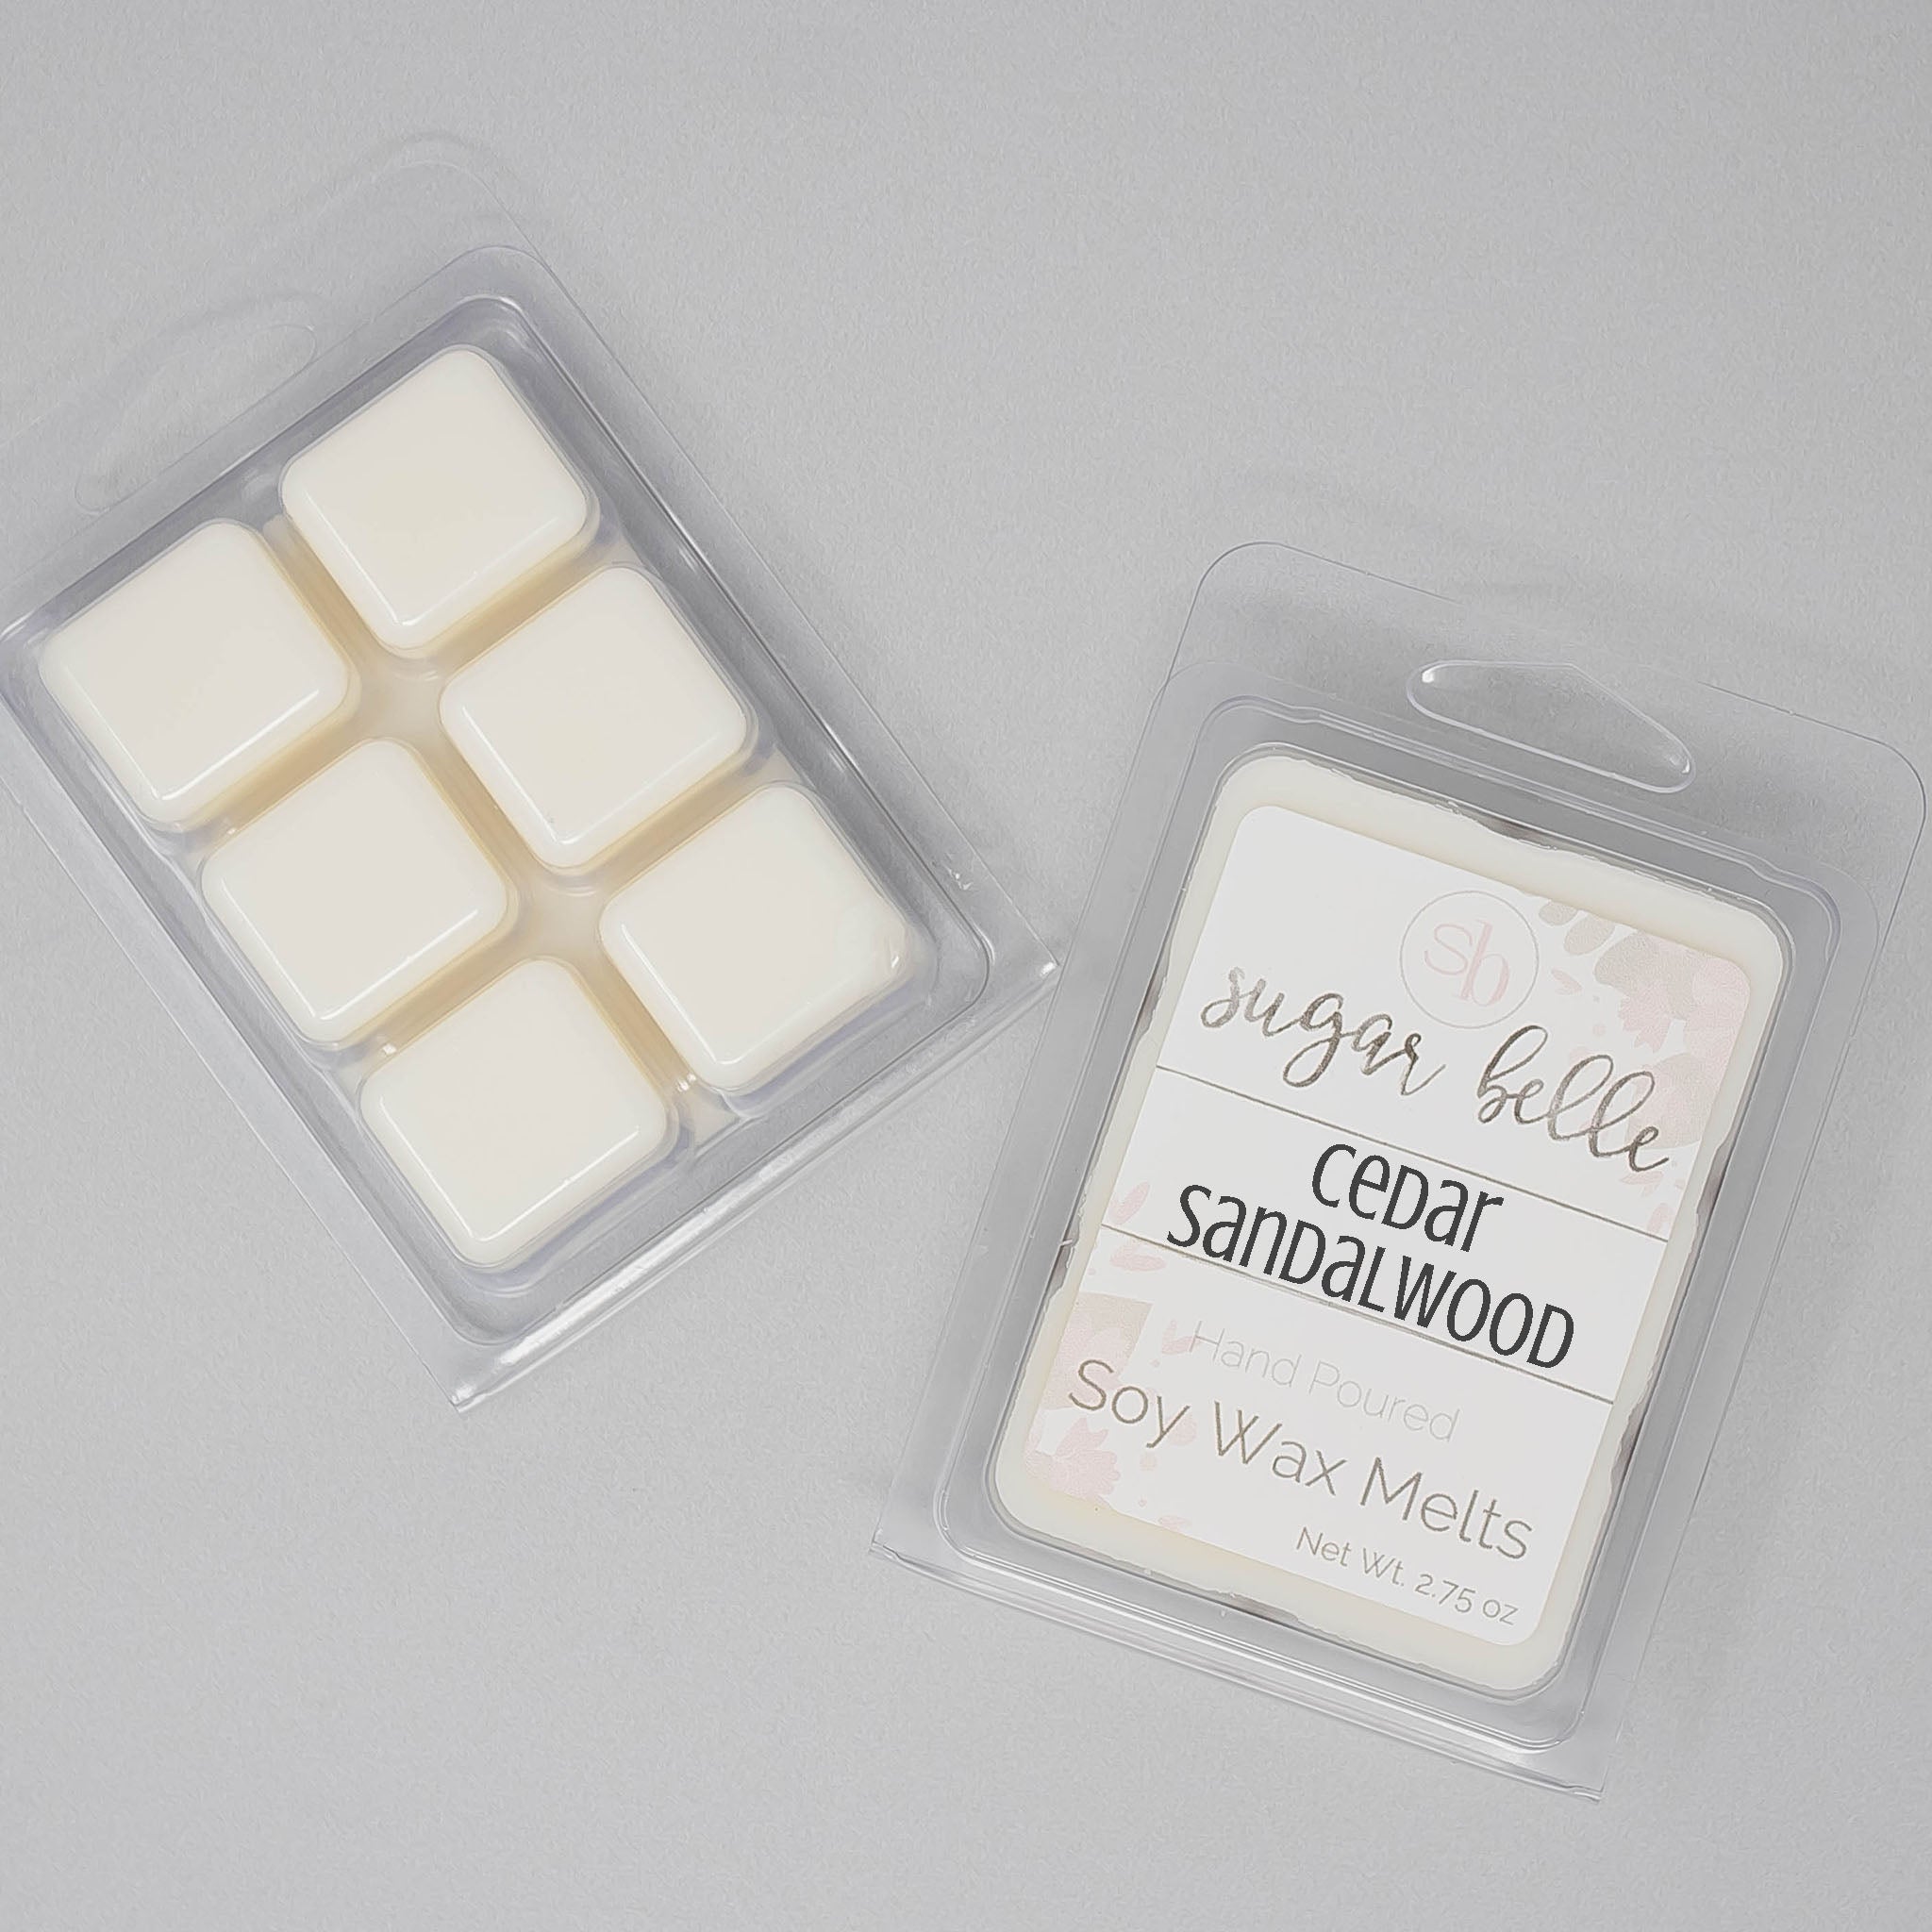 Morning Wood - Sandalwood Scented Wax Melt - 1 Pack - 2 Ounces - 6 Cubes